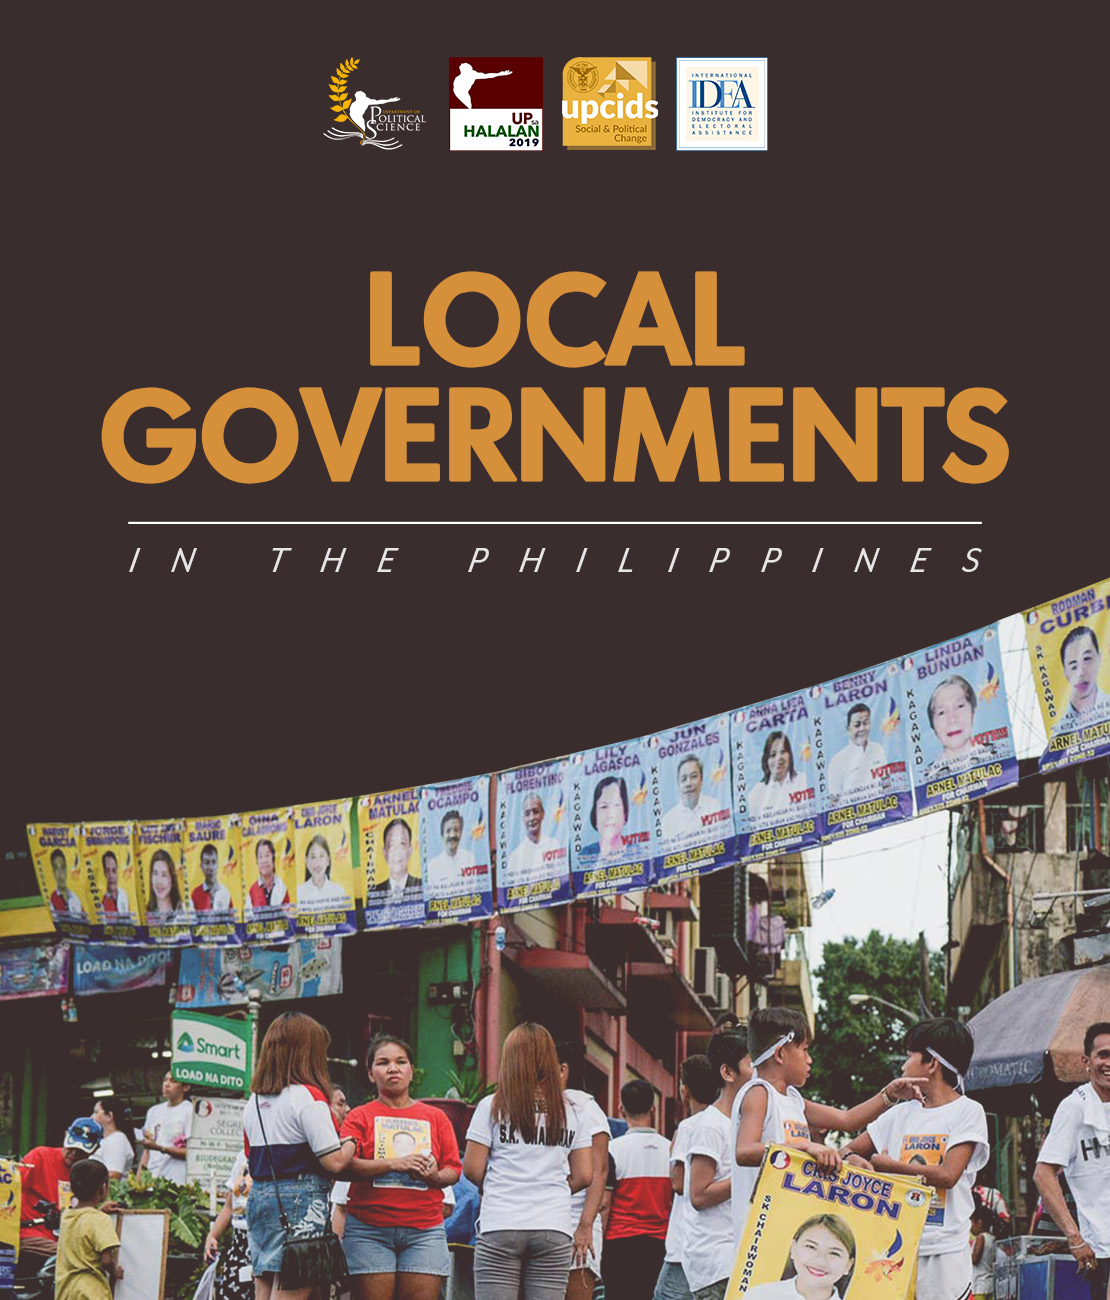 Local Governments in the Philippines UP sa Halalan